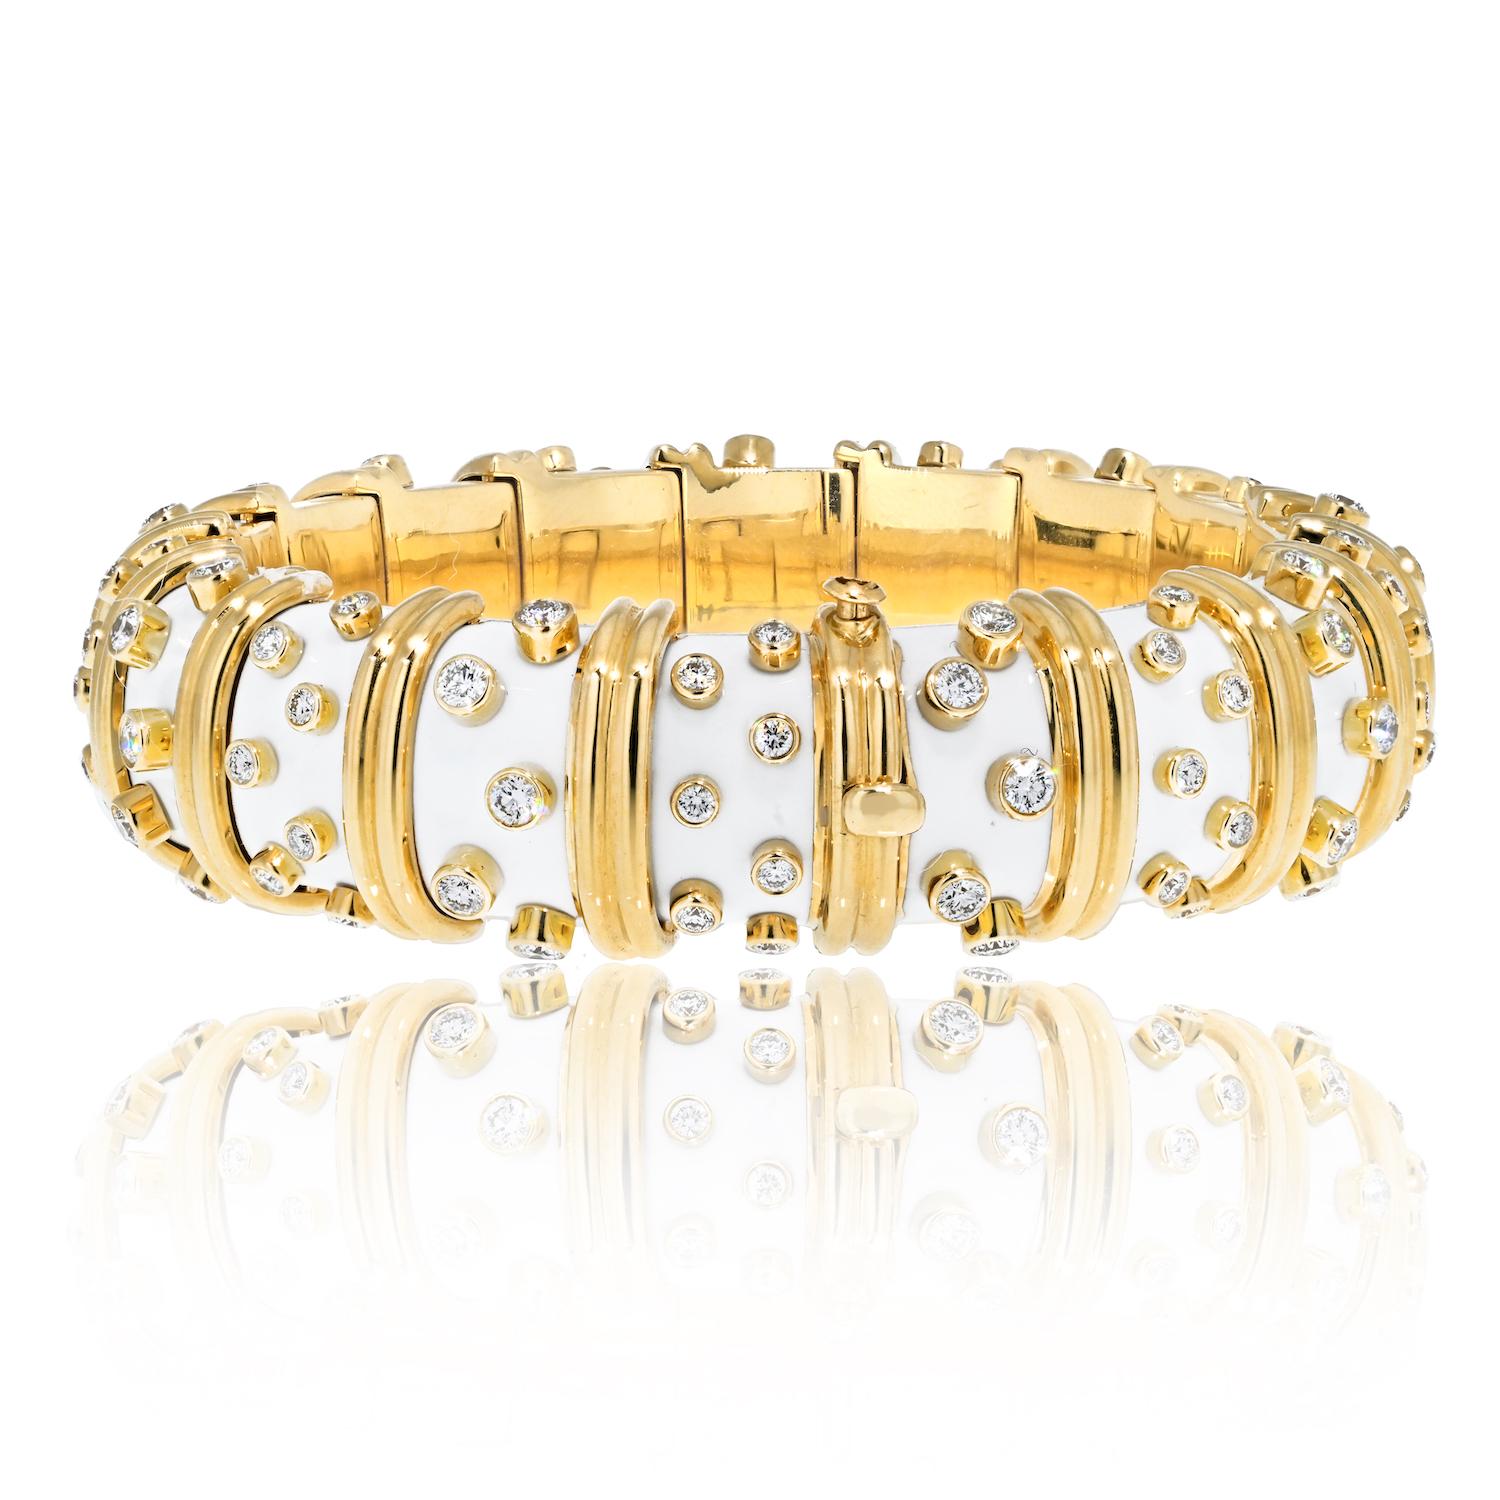 Introducing a masterpiece of exceptional artistry, the Tiffany & Co. Schlumberger Platinum & 18K Yellow Gold White Enamel Diamond Bangle Bracelet. This remarkable piece is a true testament to timeless elegance and the renowned collaboration between